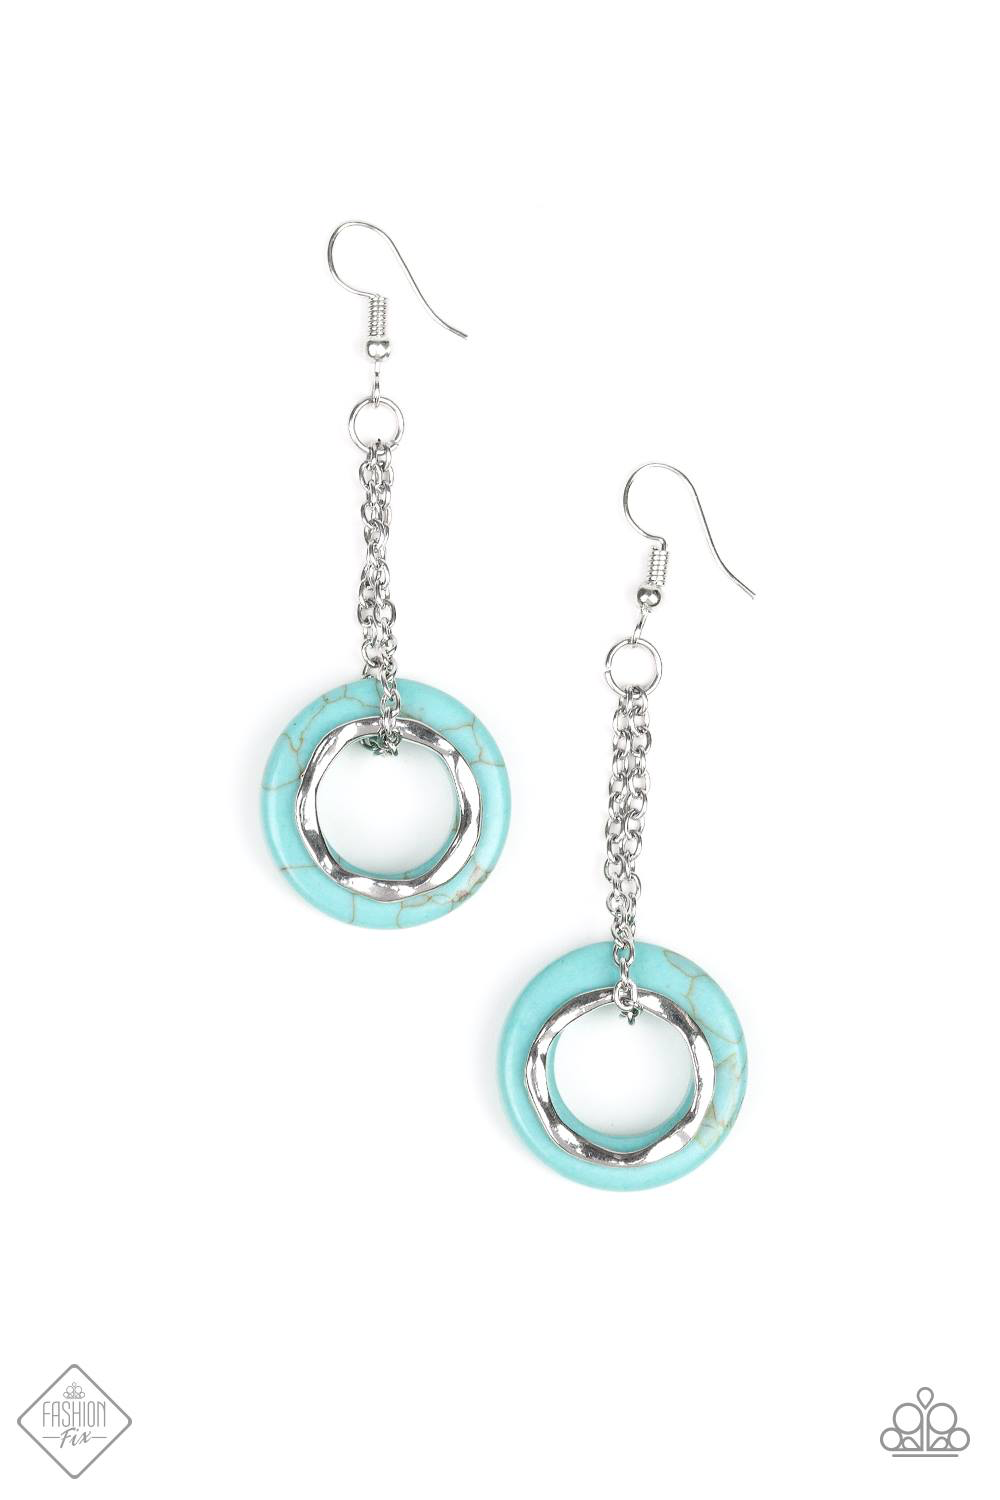 Mojave Oasis Paparazzi Accessories Earrings